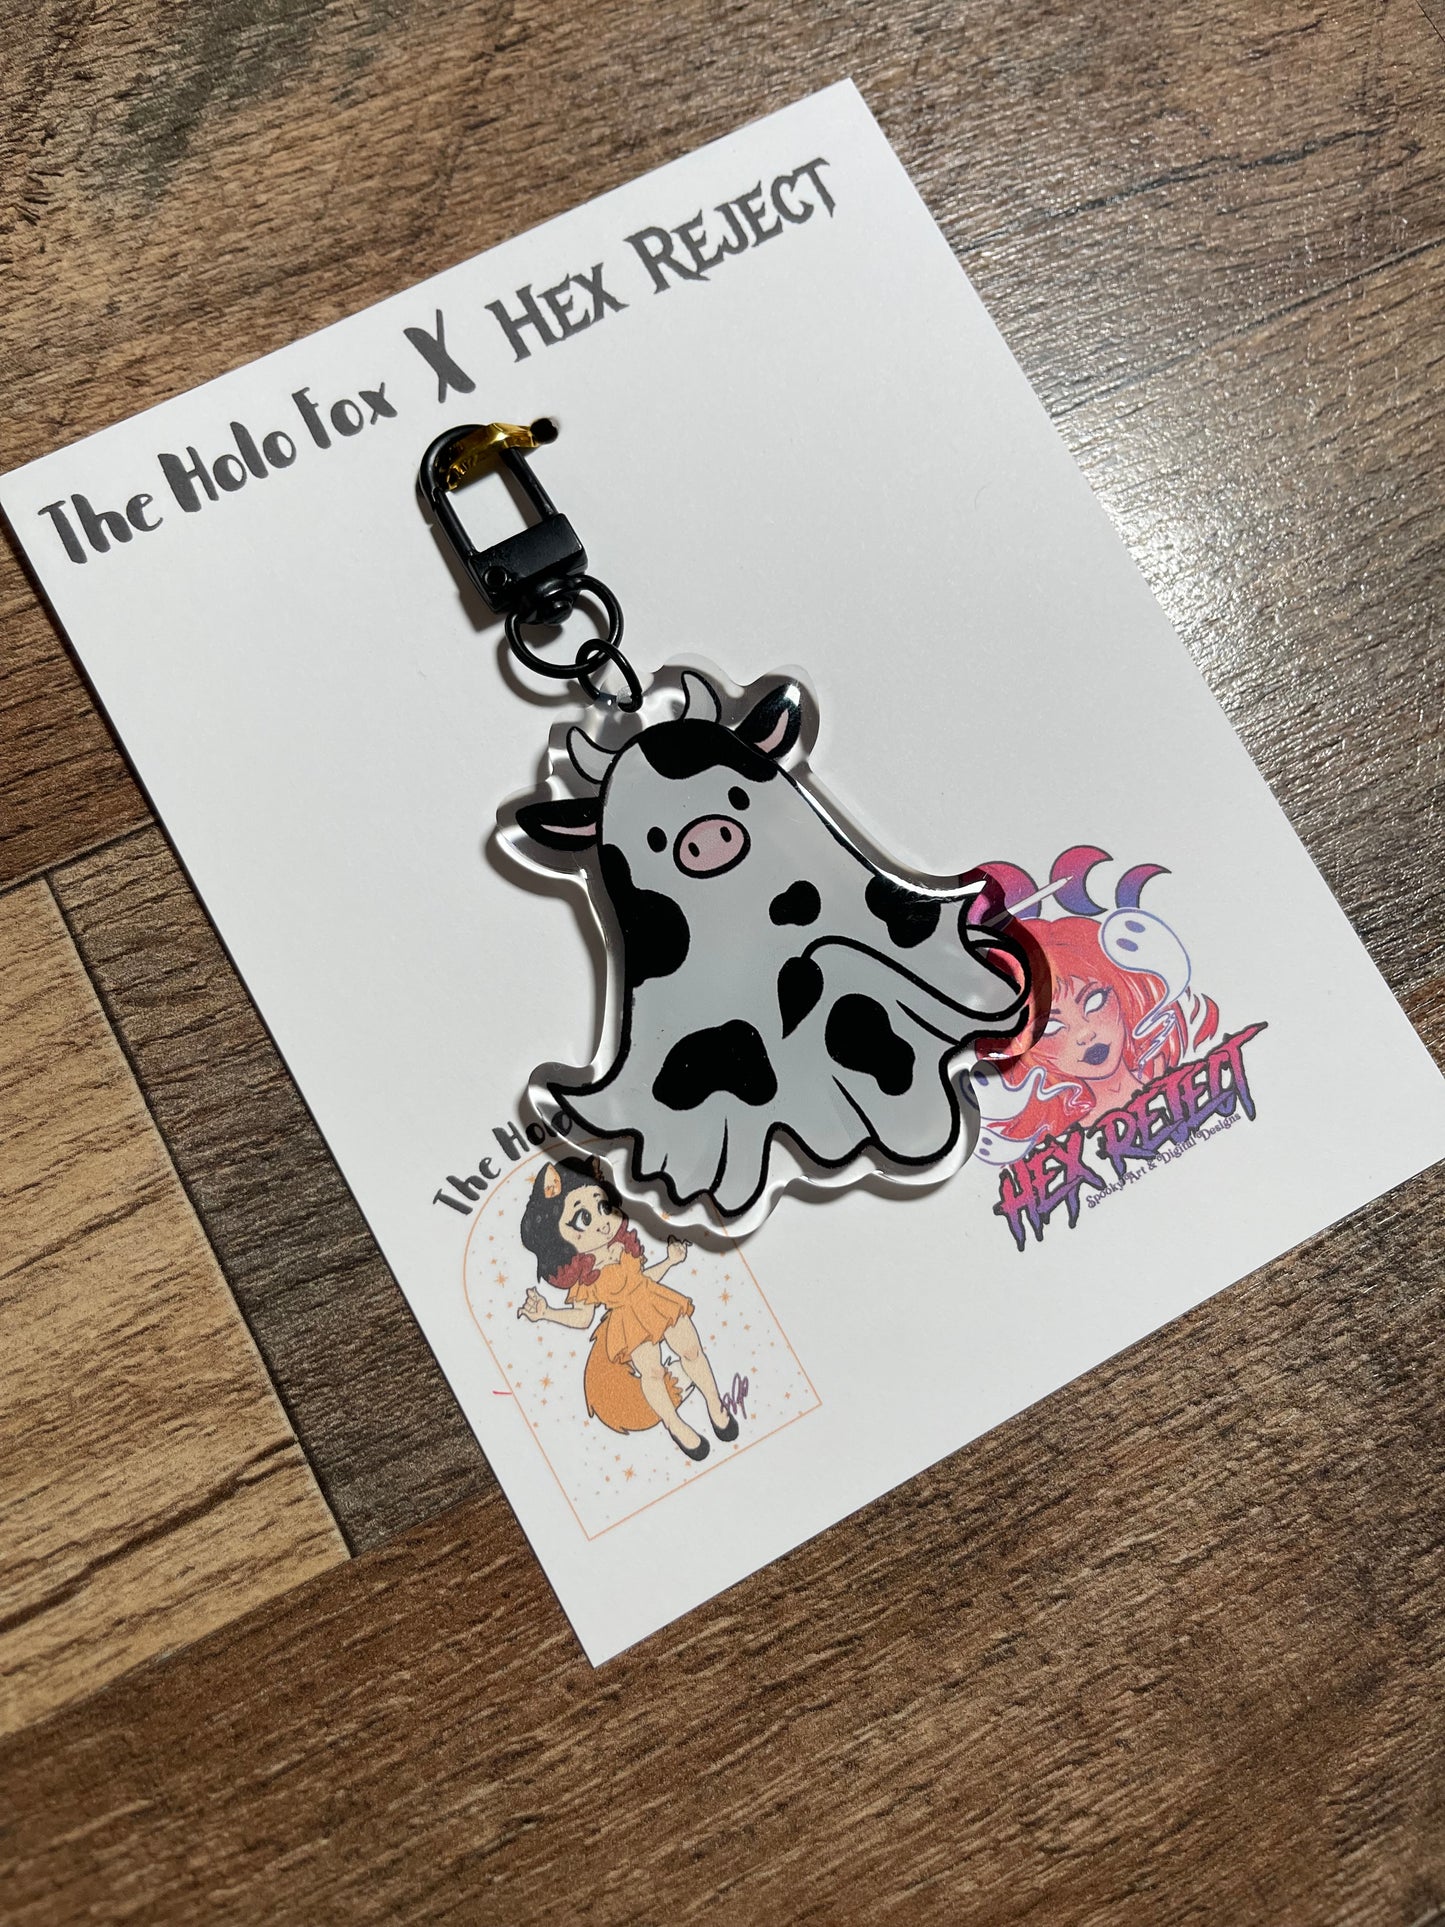 Boocow hex reject x the holo fox keychains